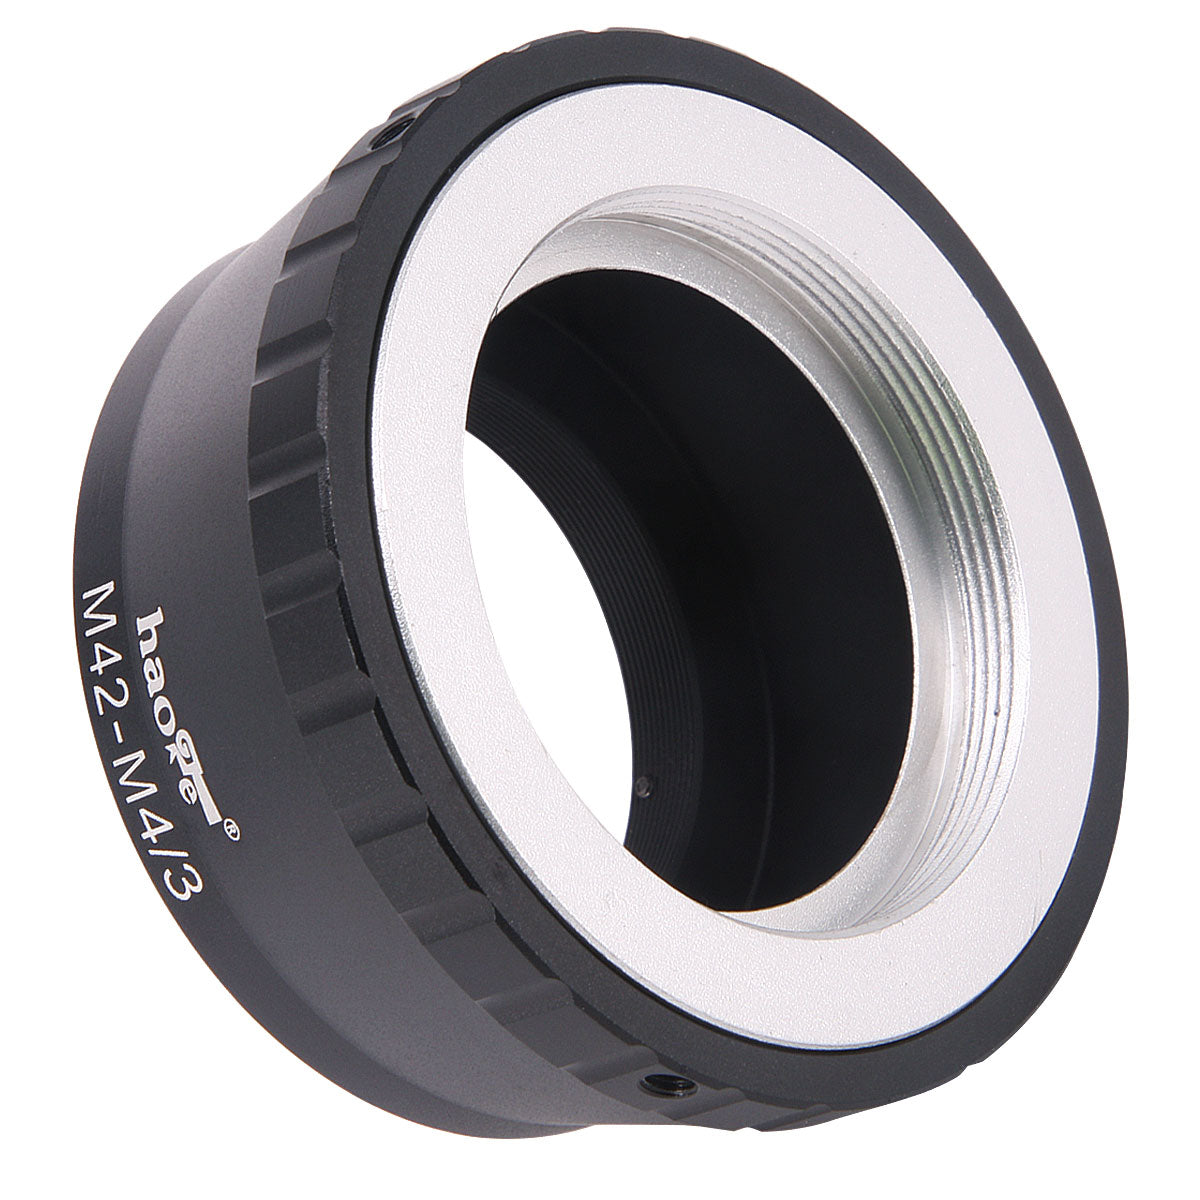 Haoge Manual Lens Mount Adapter for 42mm M42 Mount Lens to Olympus and Panasonic Micro Four Thirds MFT M4/3 M43 Mount Camera